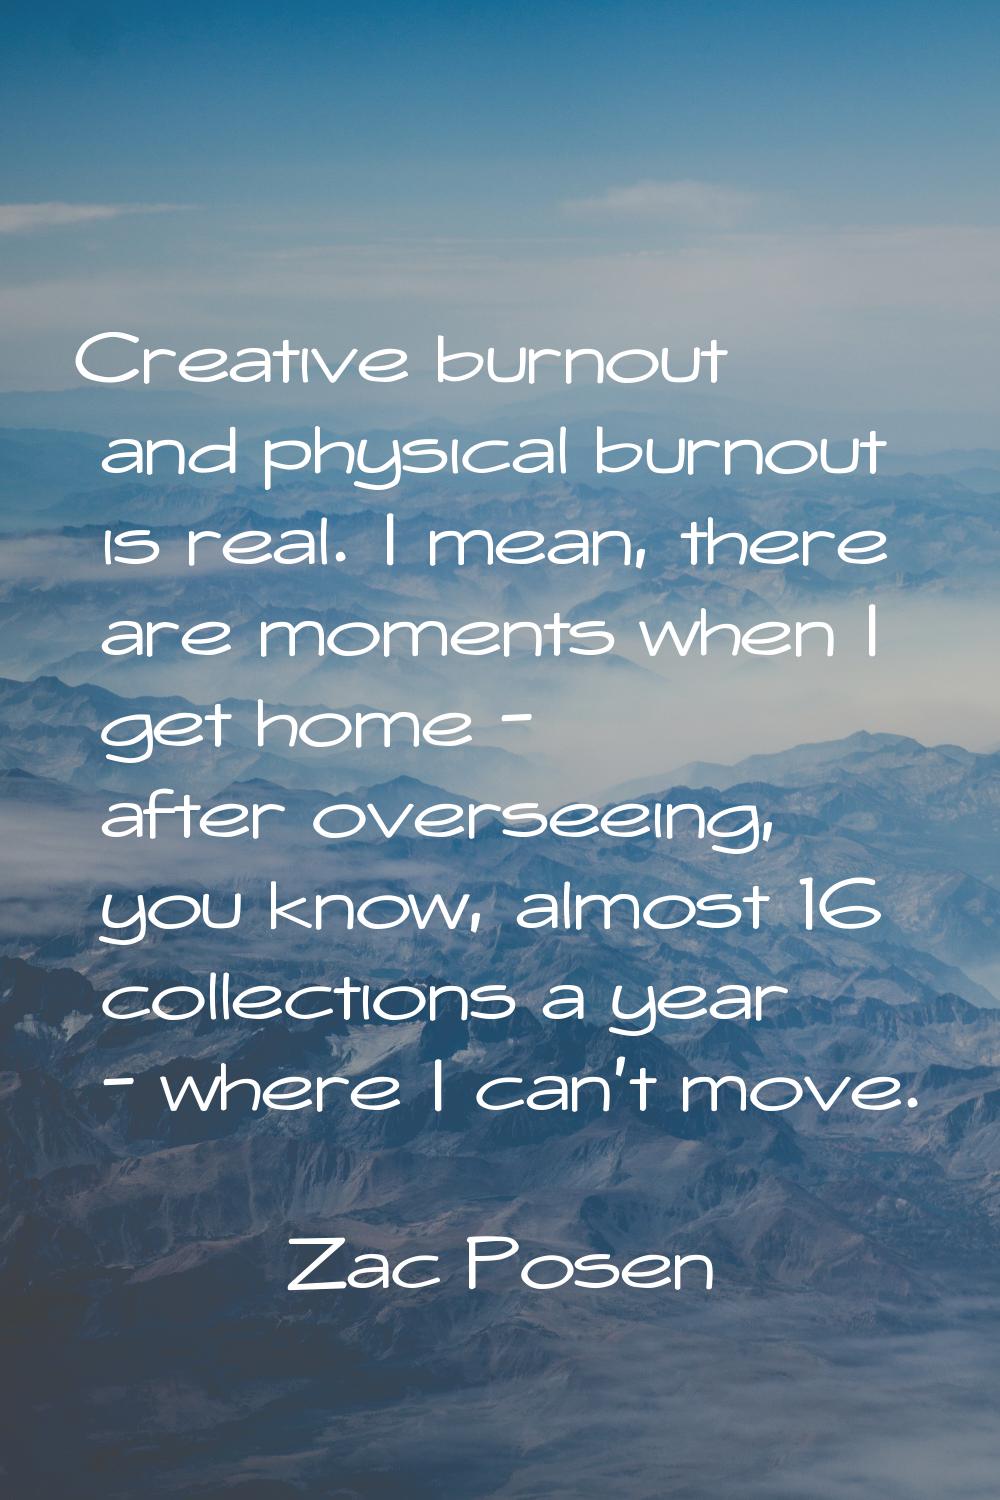 Creative burnout and physical burnout is real. I mean, there are moments when I get home - after ov